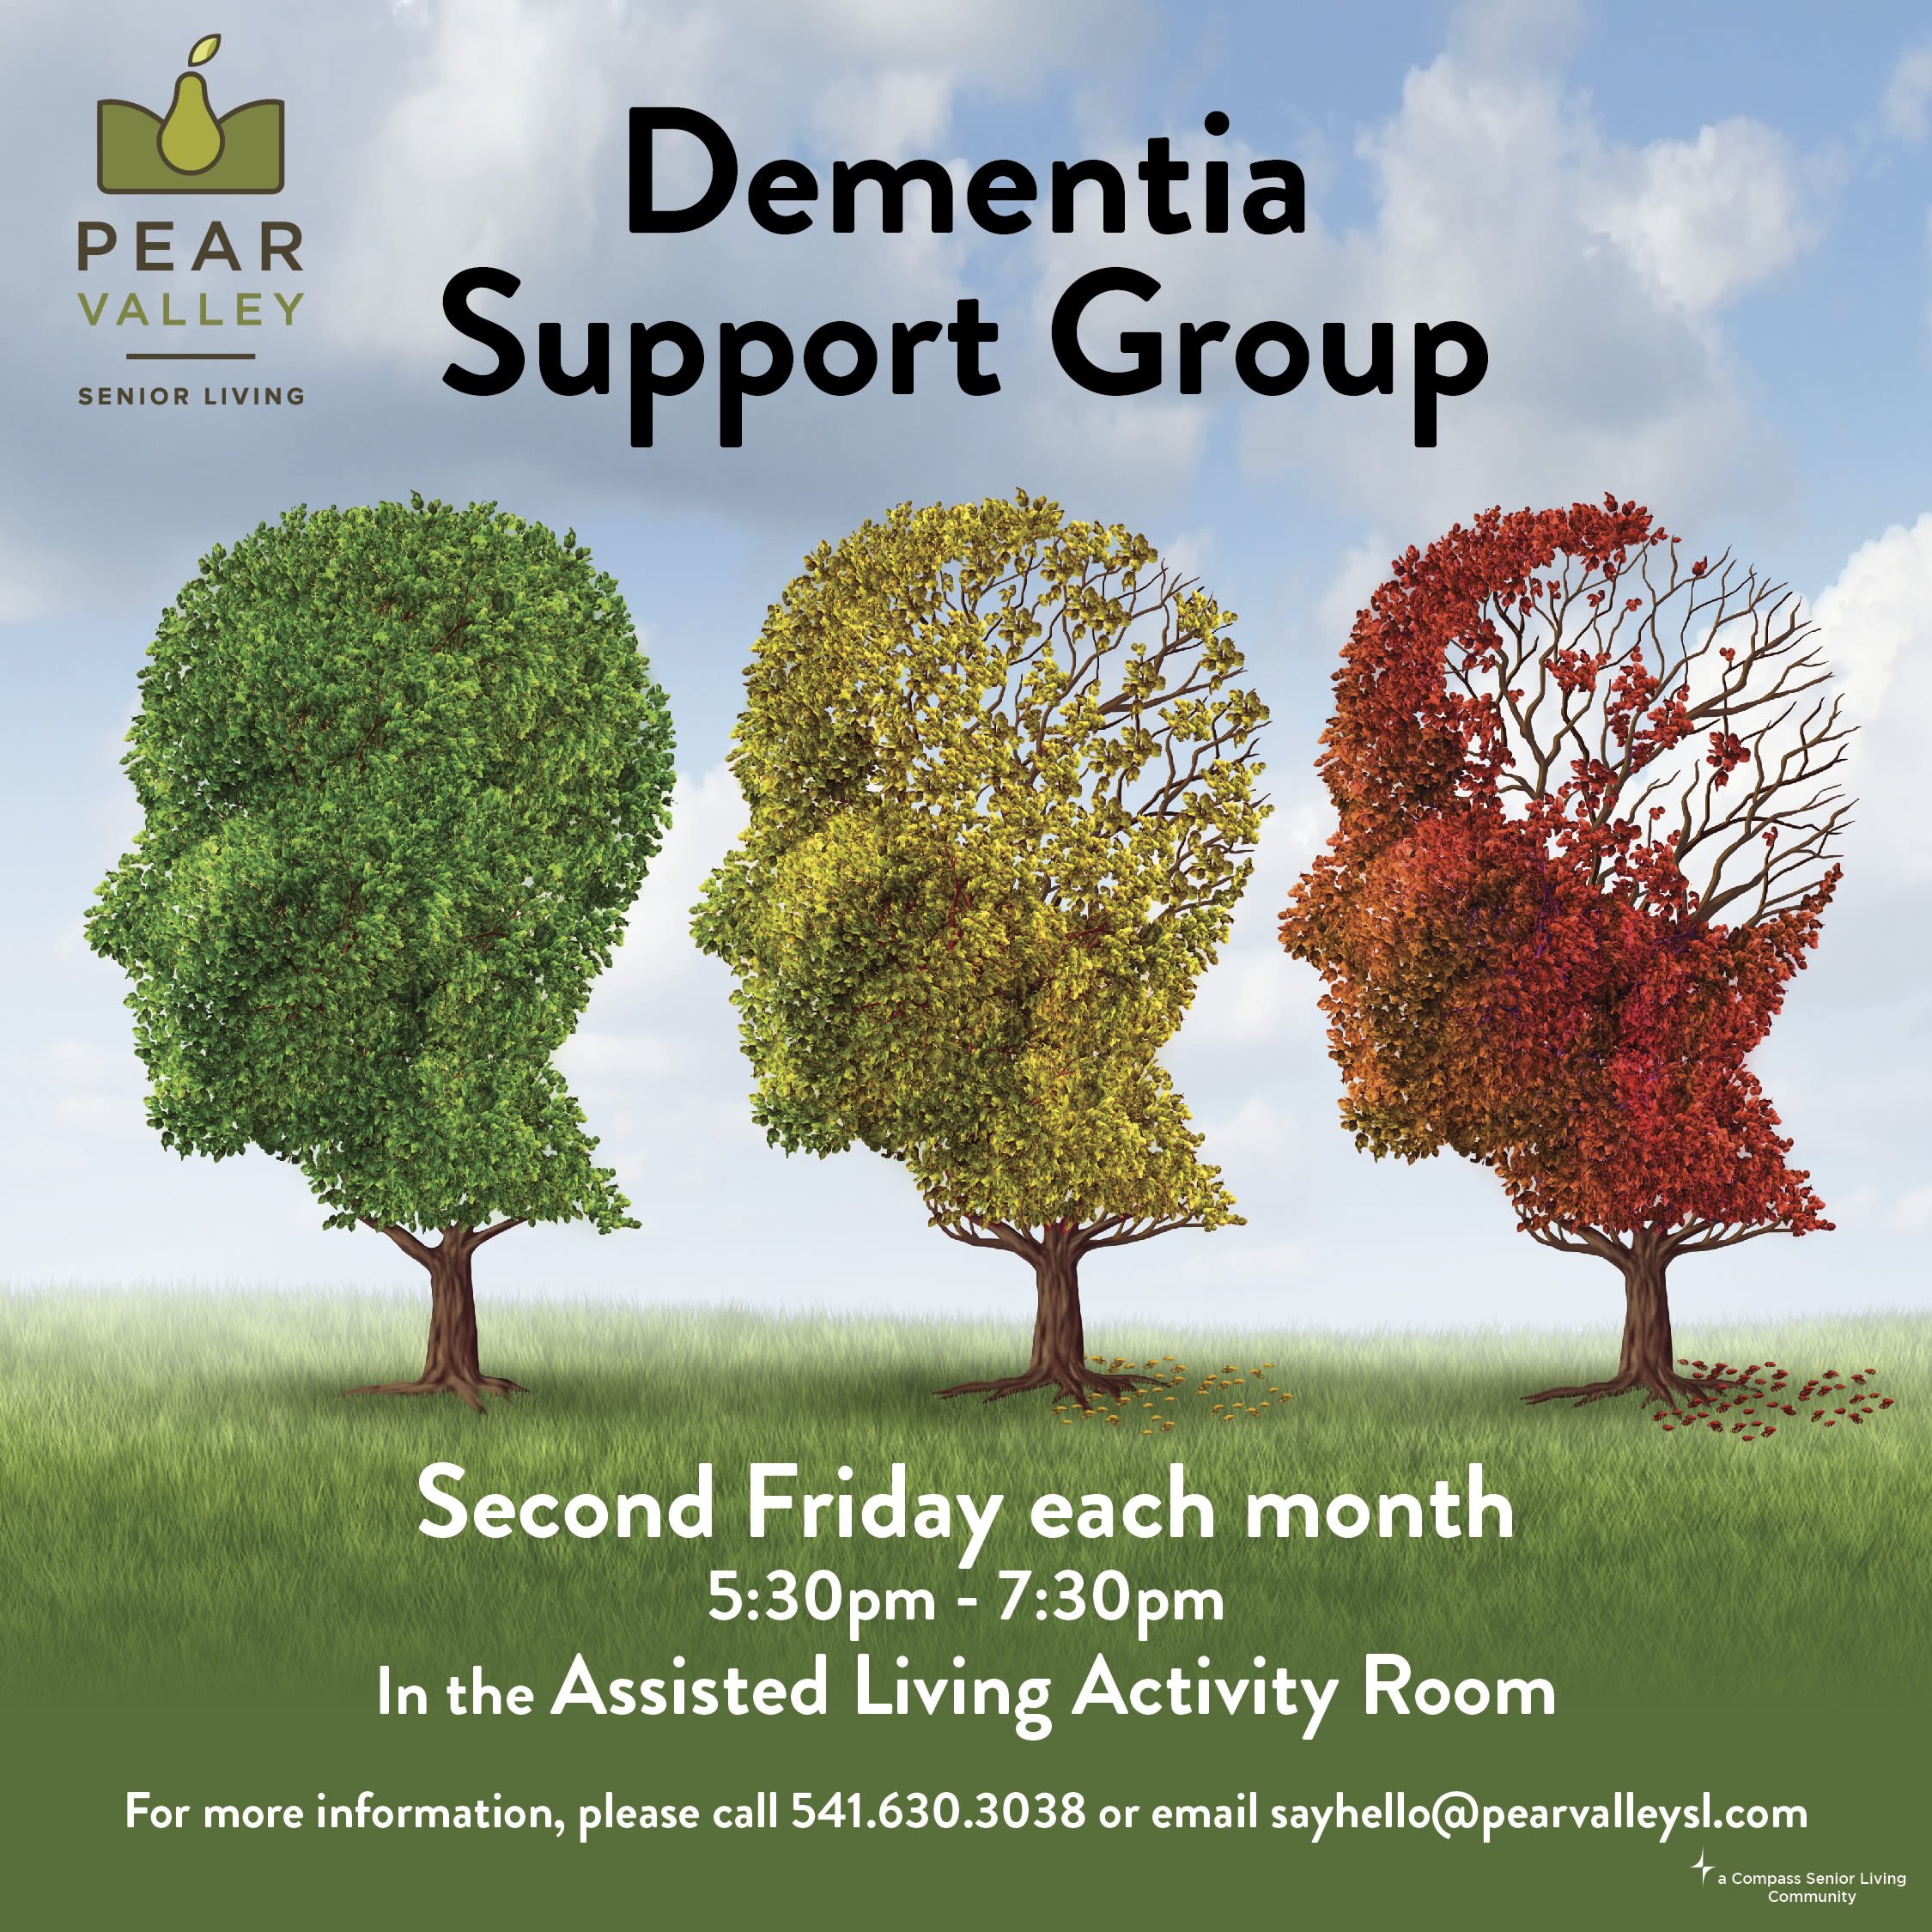 Dementia support group recurring event flyer